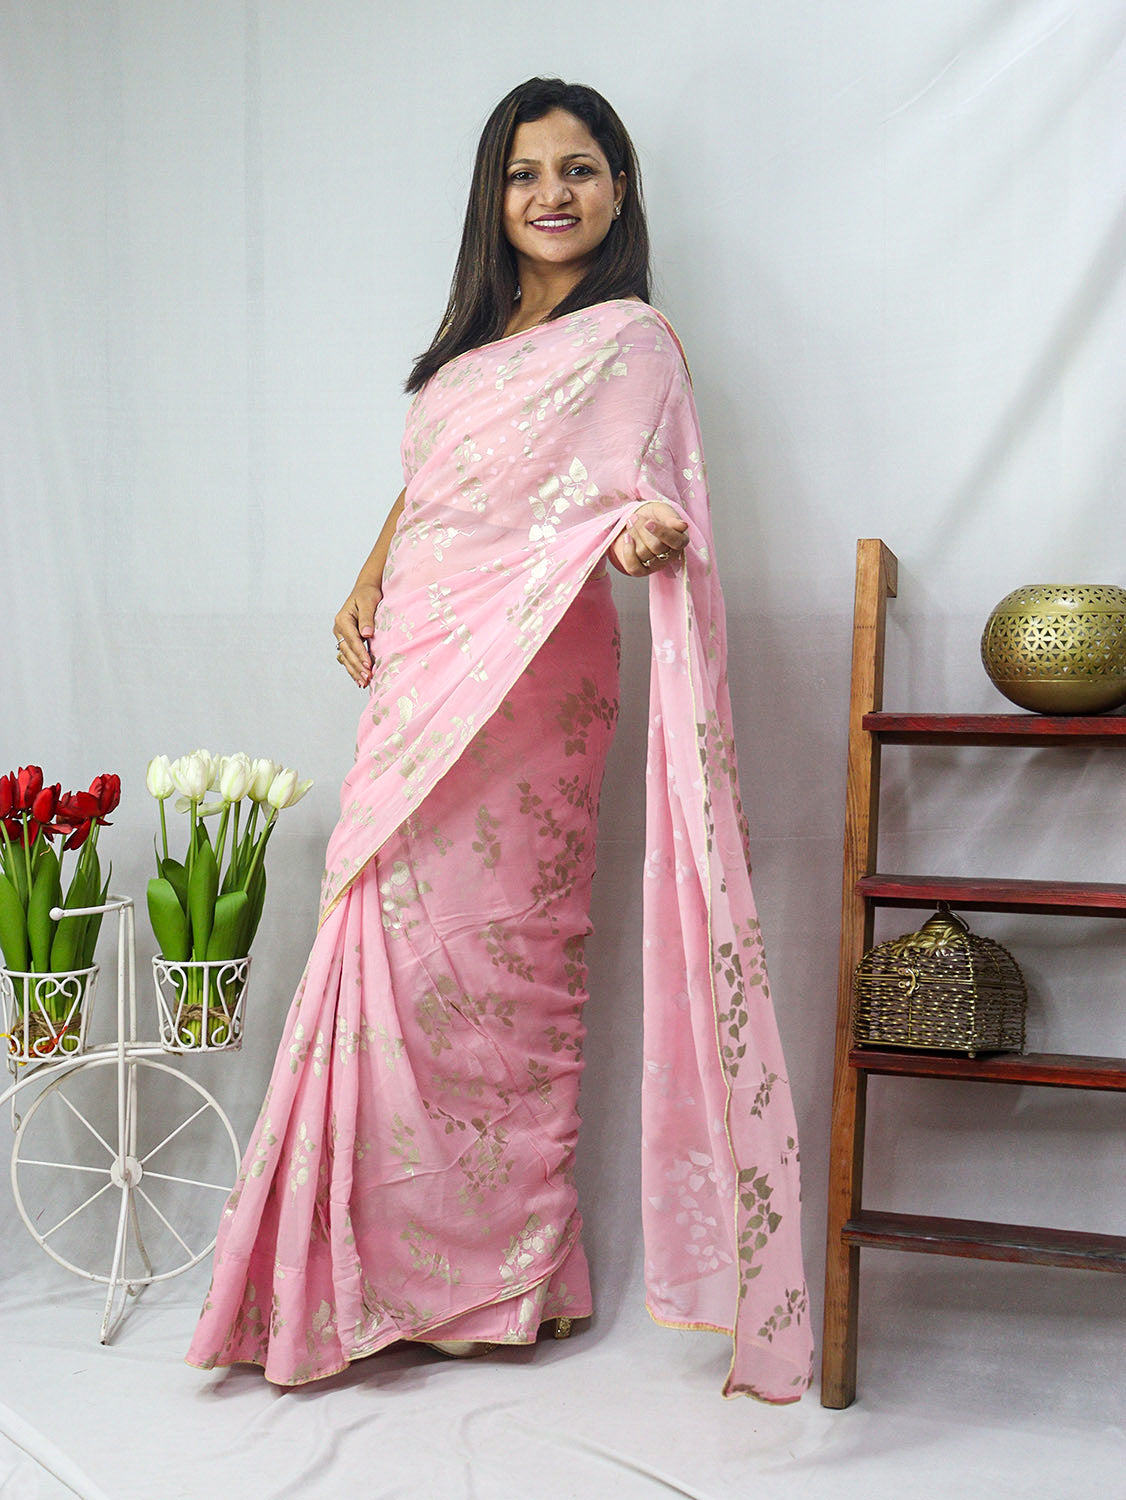 Shop the Latest Pink Foil Print Georgette Saree - Trendy and Elegant